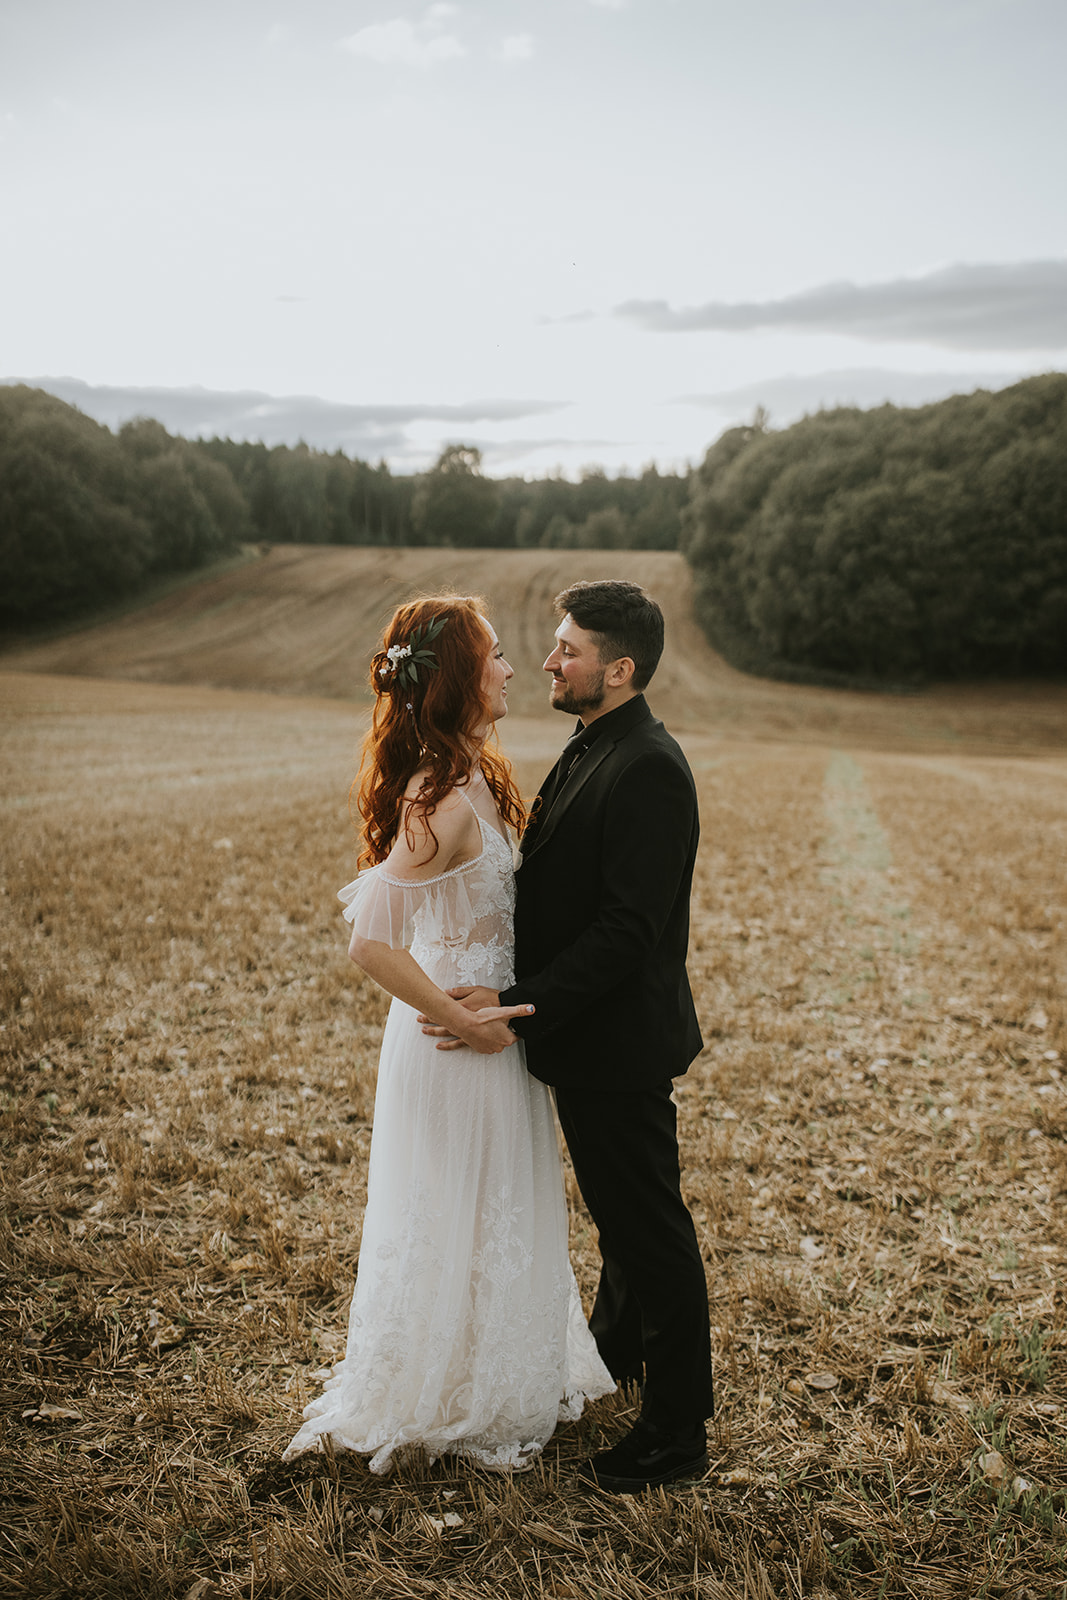 A beautiful meadow so close to the woodland set the perfect backdrop for their portraits